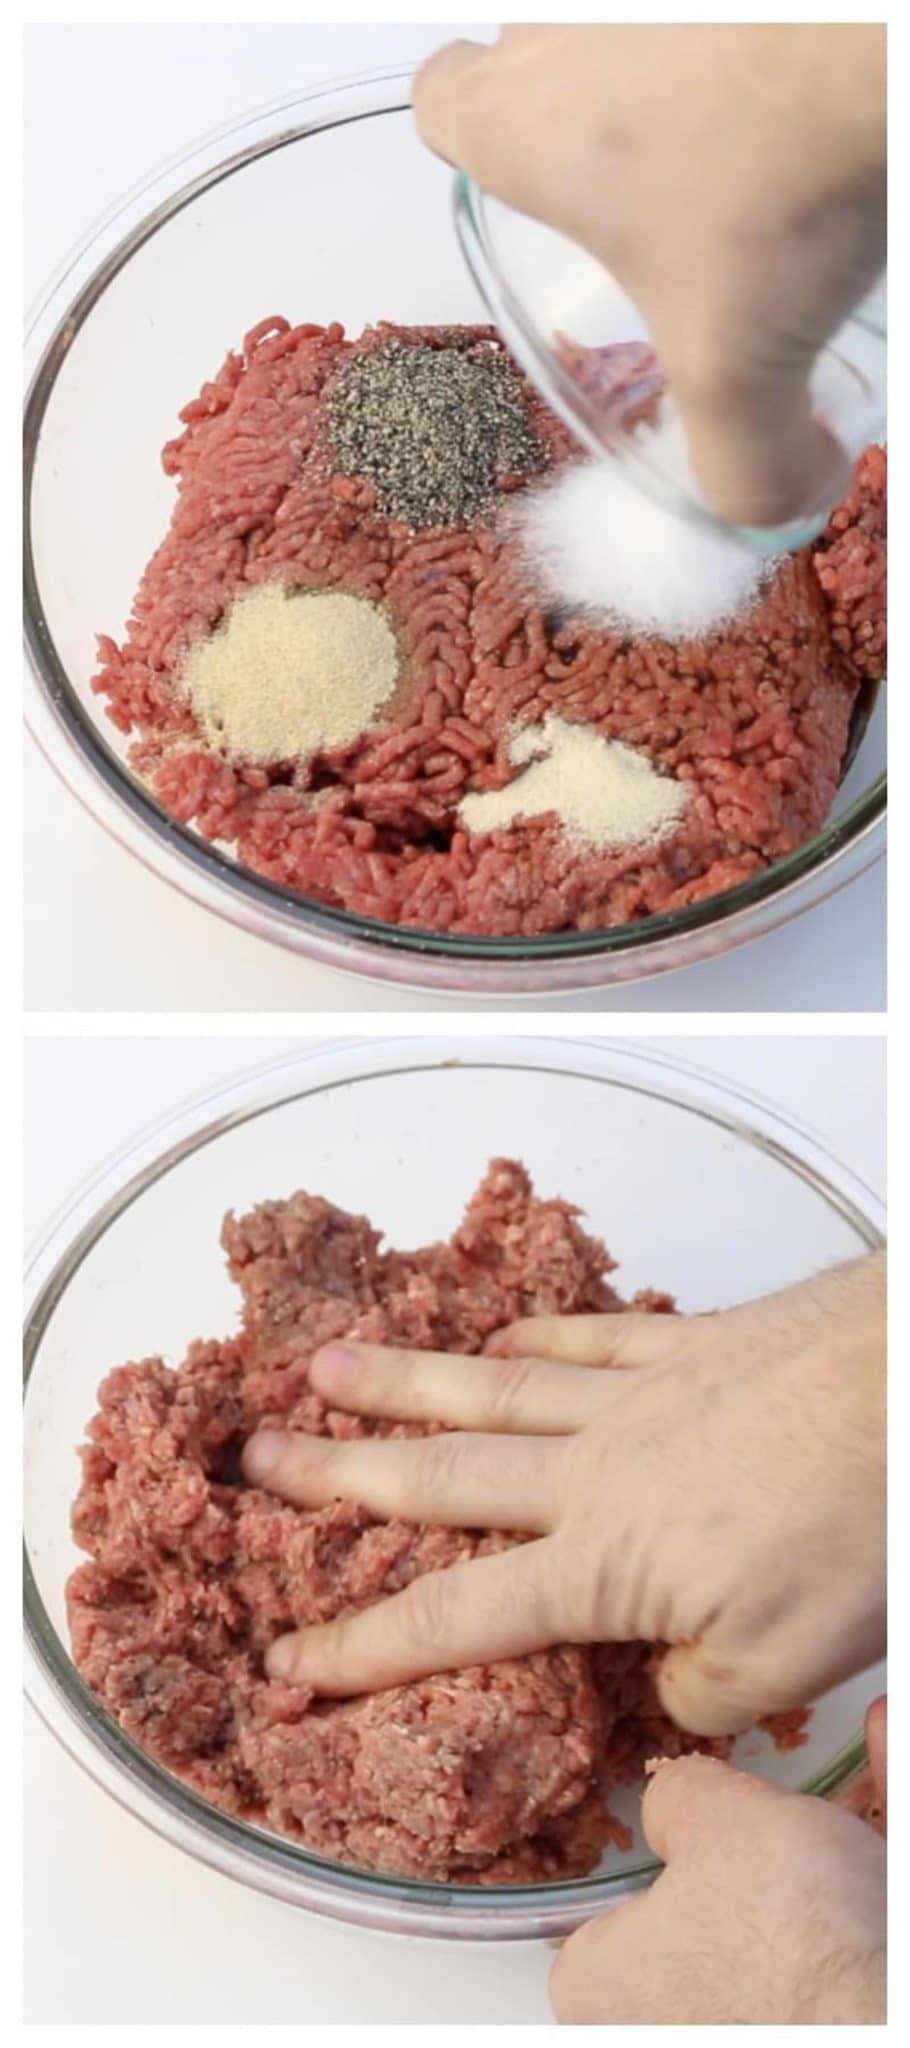 Juicy Lucy process photo mixing ground beef with spices